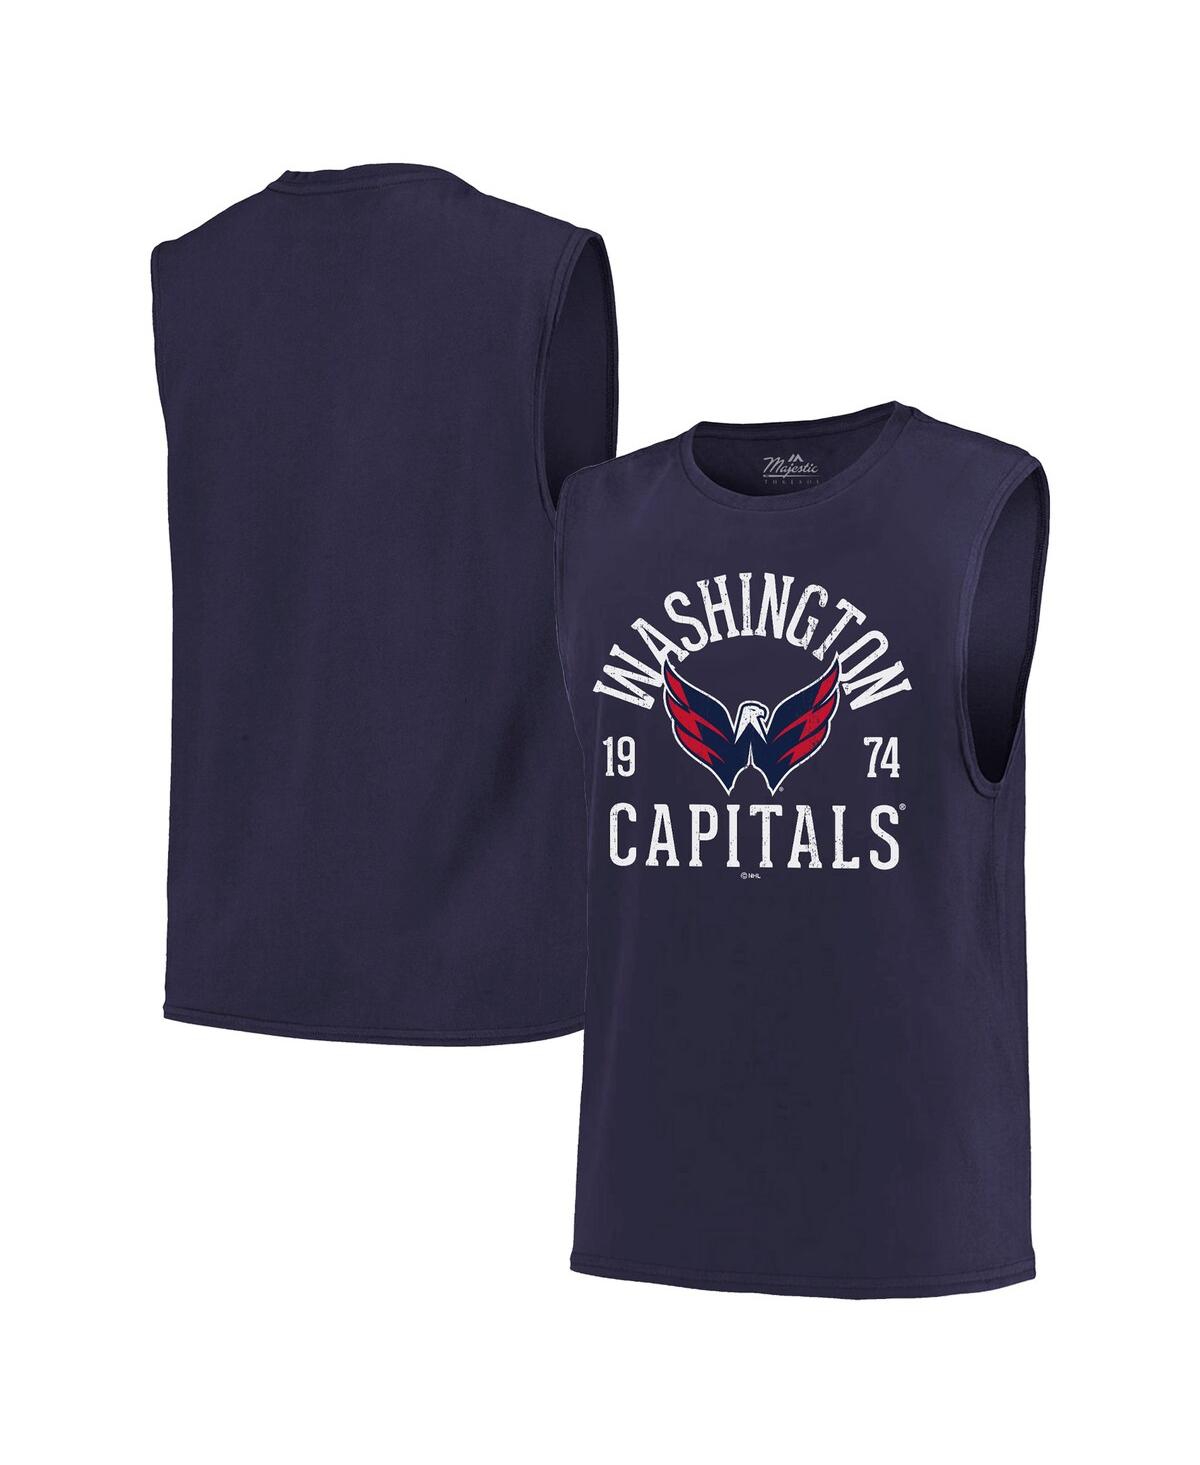 Men's Majestic Threads Navy Washington Capitals Softhand Muscle Tank Top - Navy